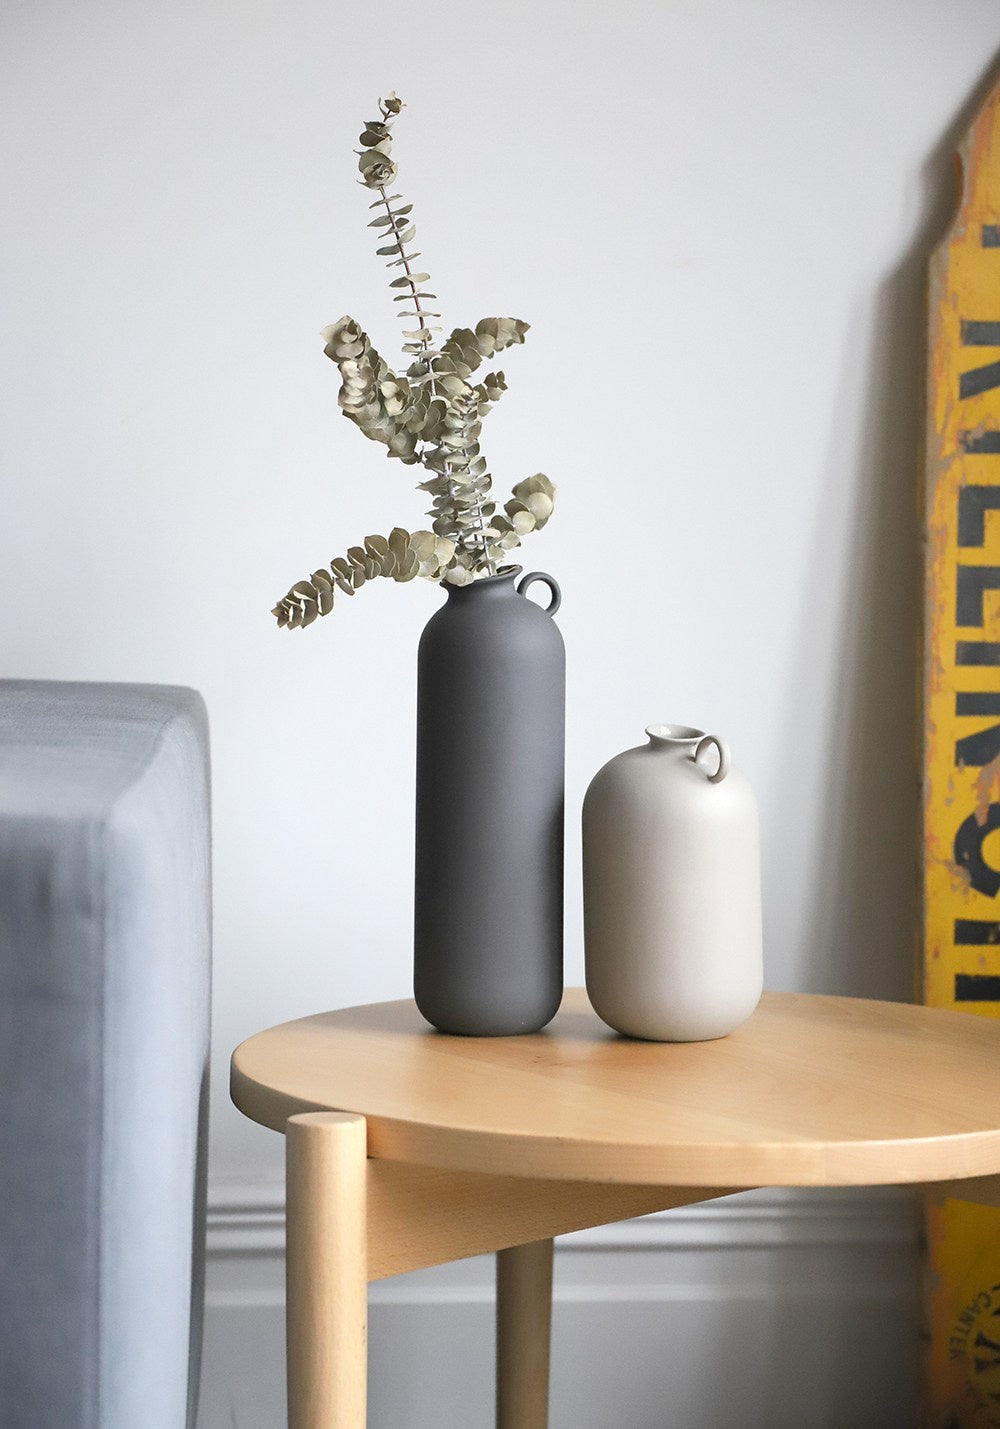 Ned Collections | Flugen Vase - Large - Found My Way Invercargill